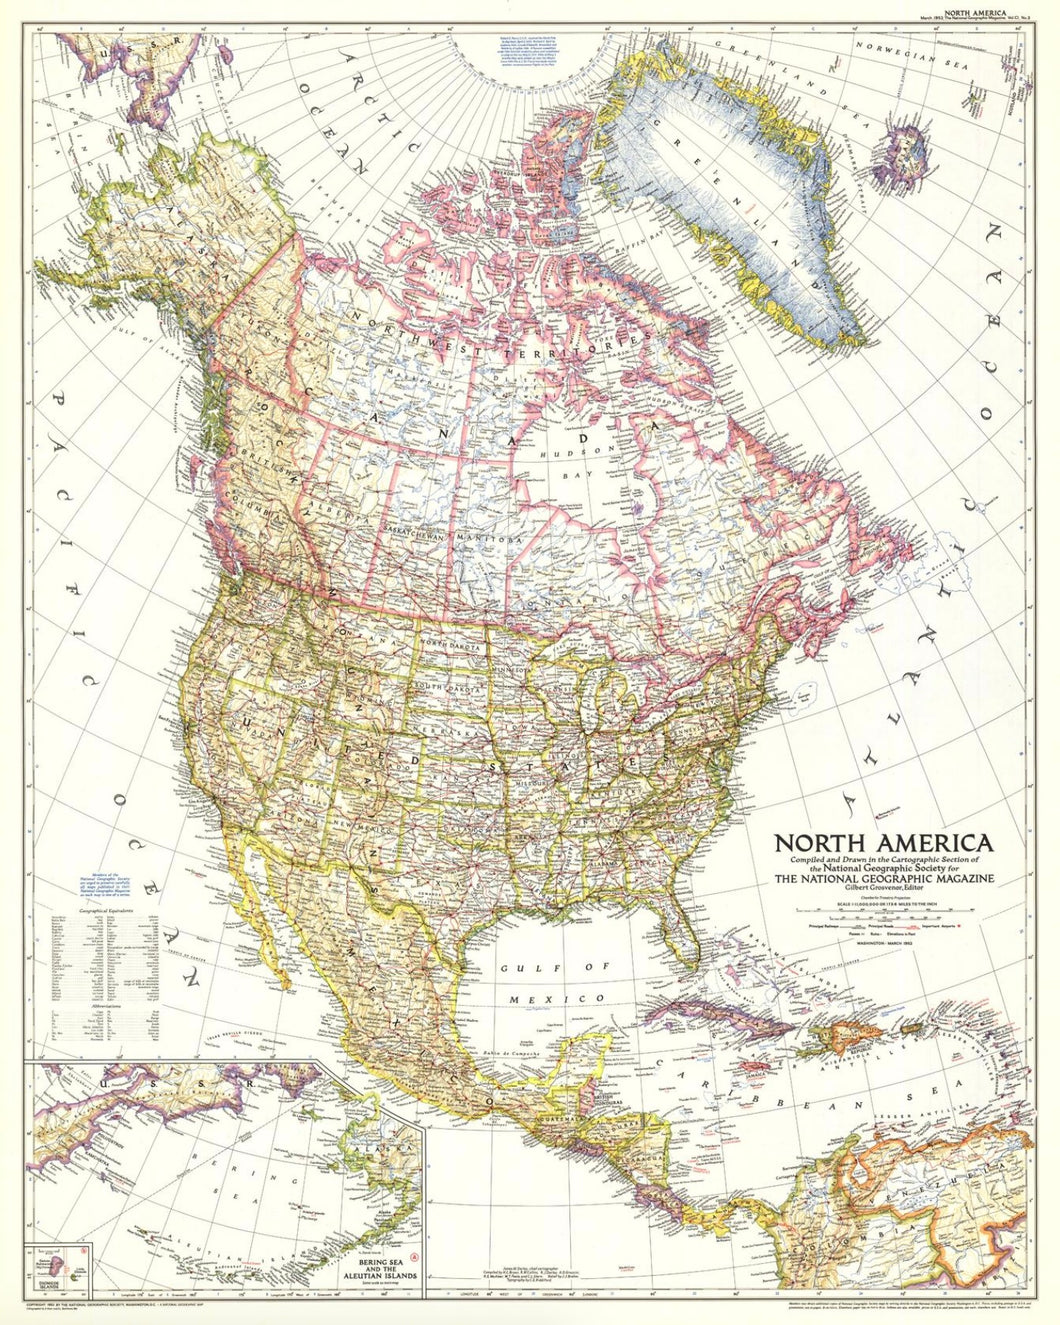 North America - Published 1952